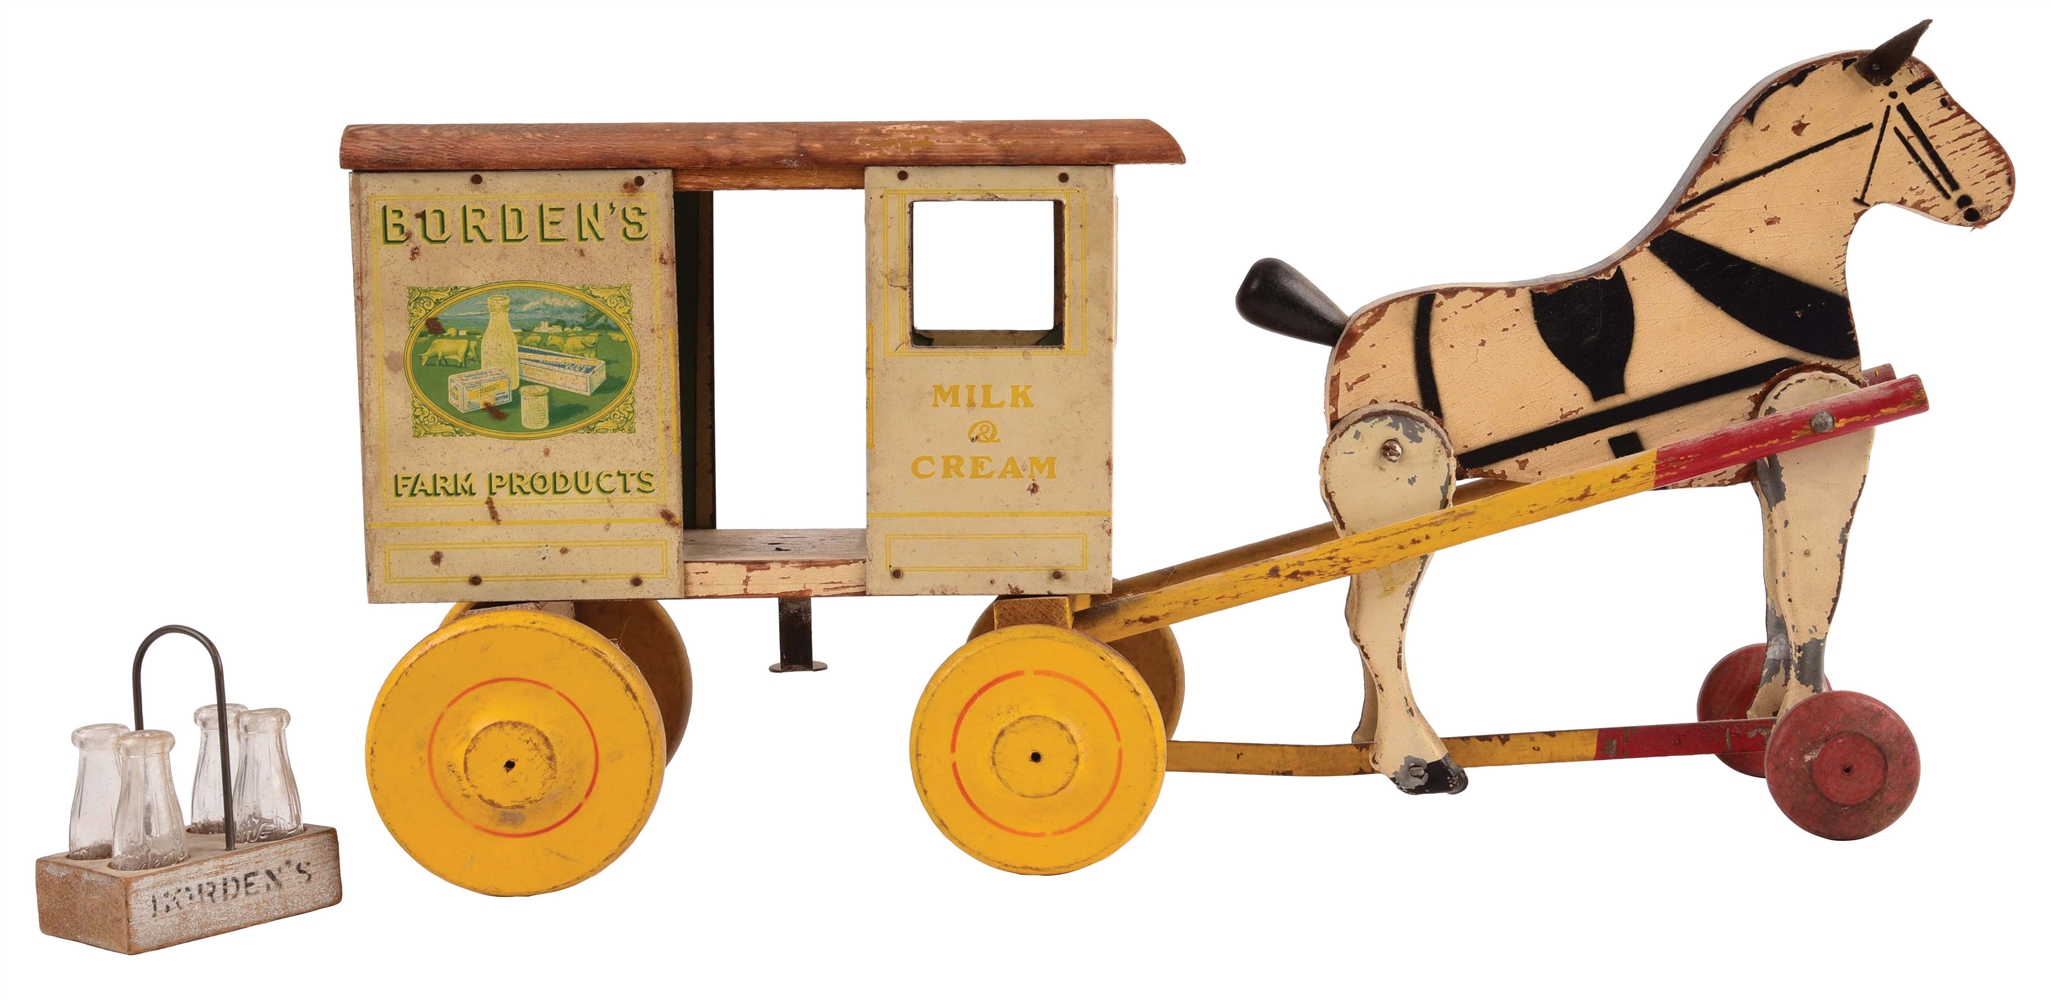 RICH TOYS PRESSED STEEL AND WOOD WOODEN BORDENS FARM PRODUCTS TRUCK.